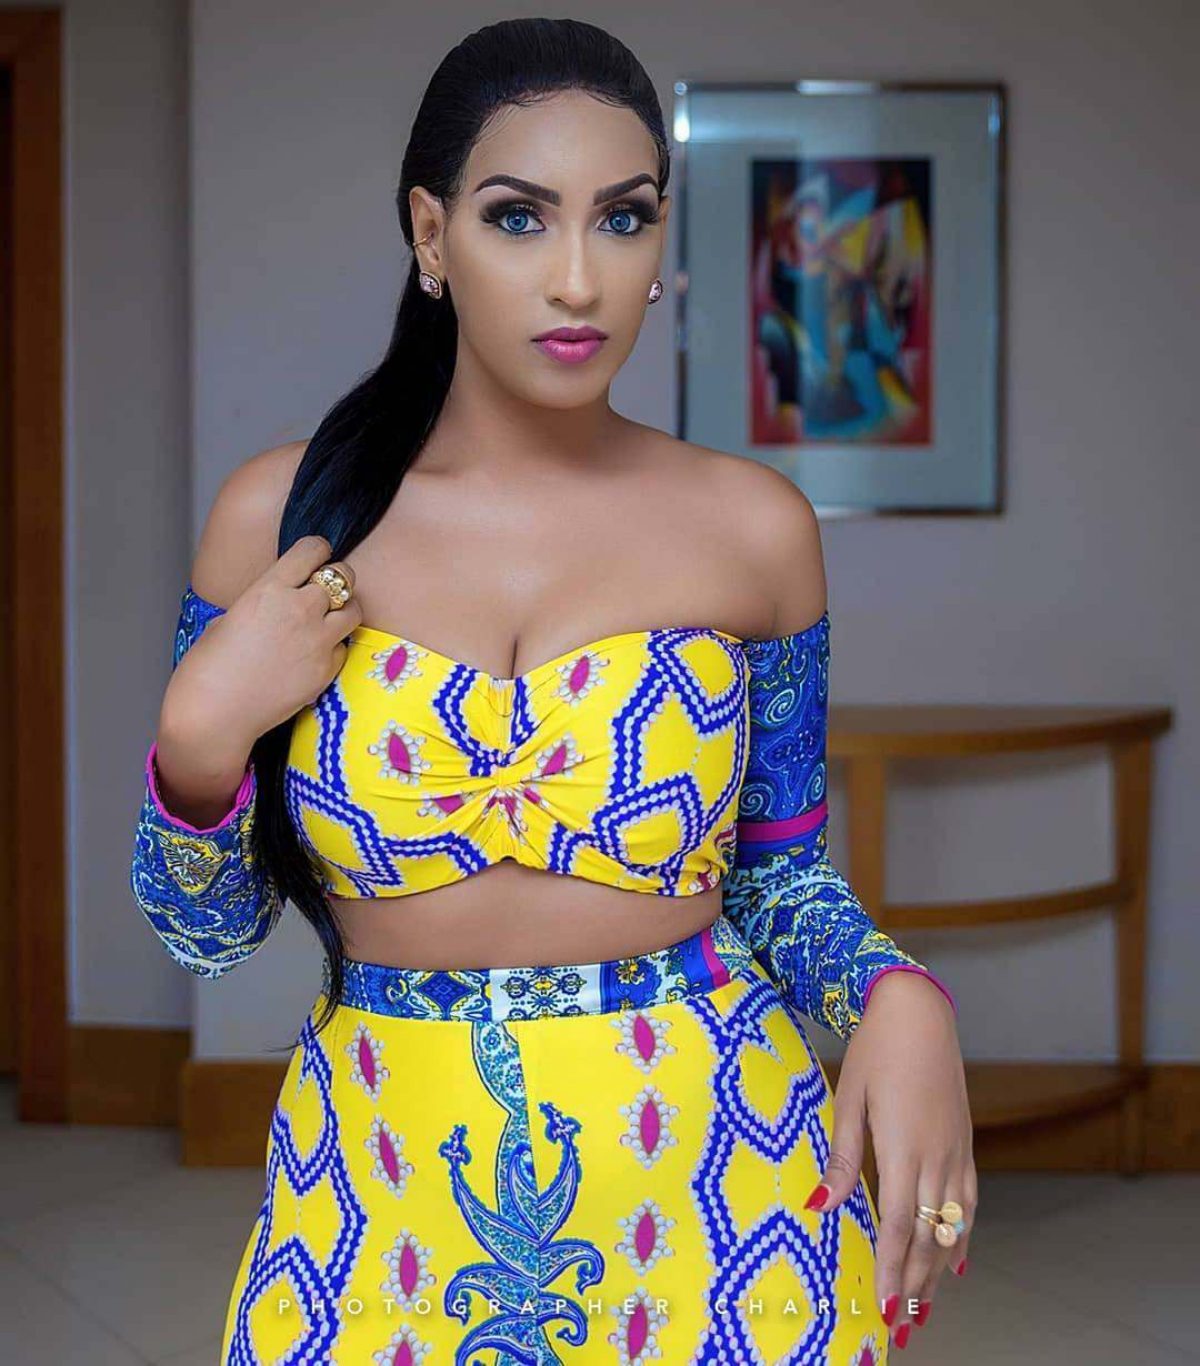 GHANA IS THE MOST EXPENSIVE COUNTRY IN WEST AFRICA – Actress, Juliet Ibrahim Declares